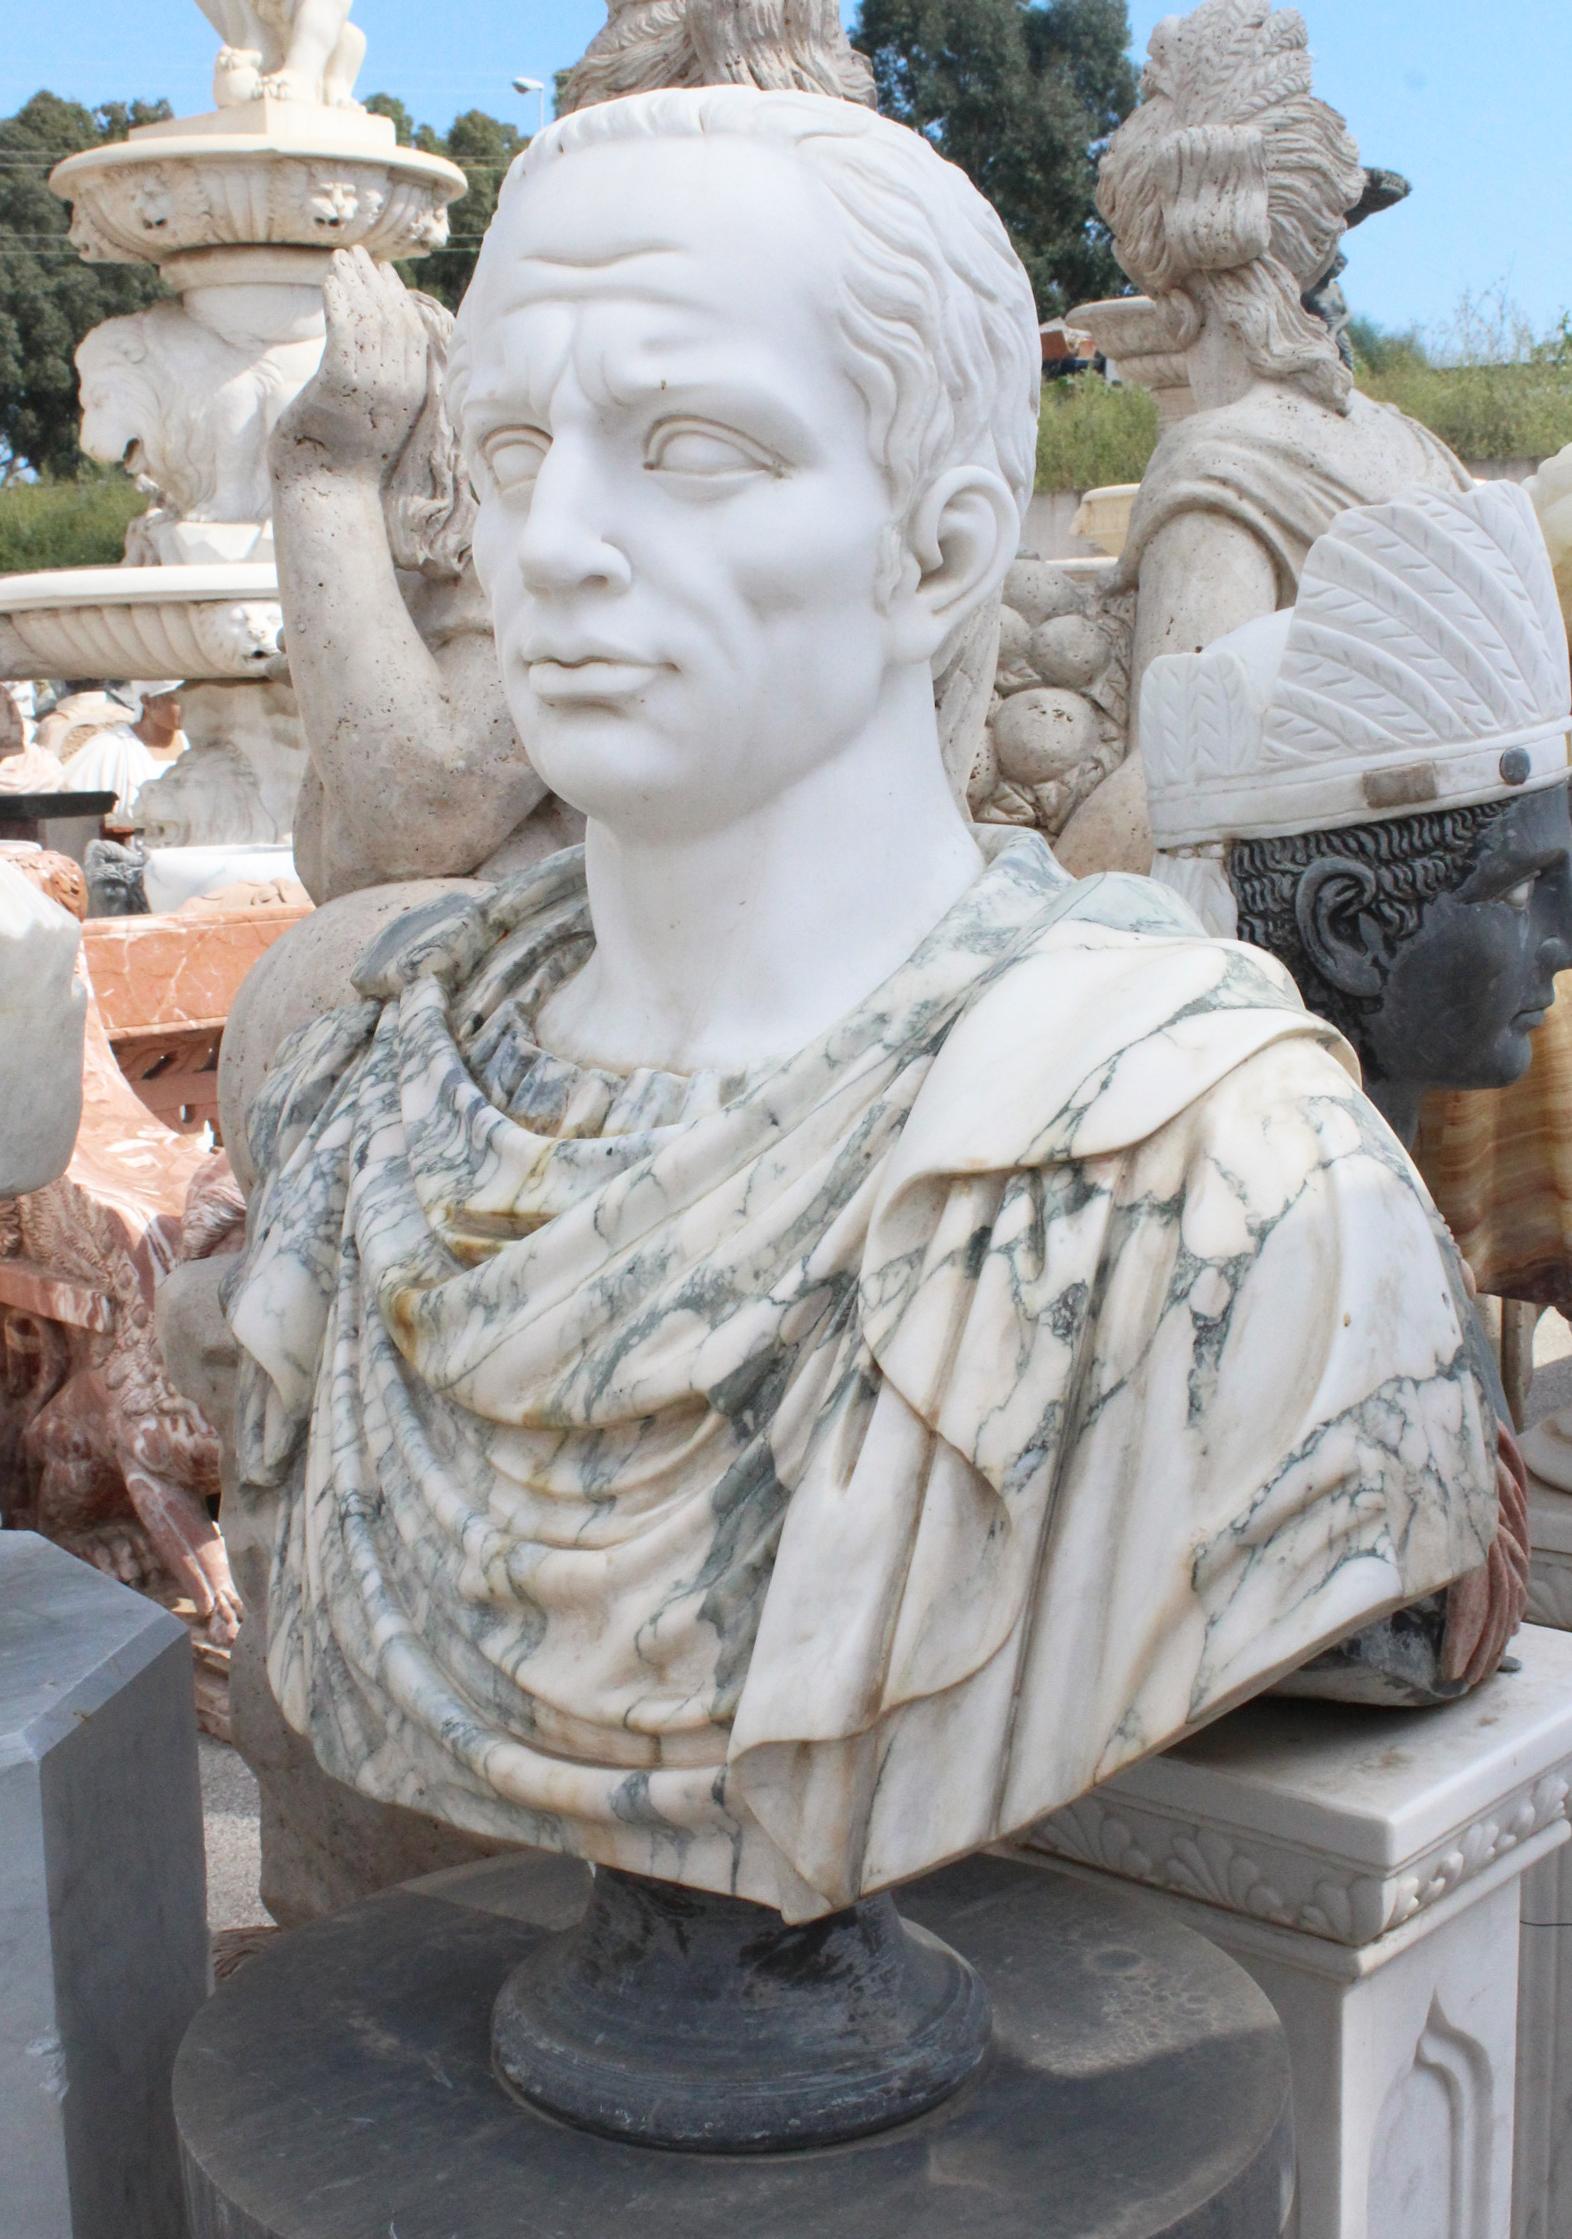 Hand-carved bust of Roman emperor Julius Caesar in different coloured marbles.